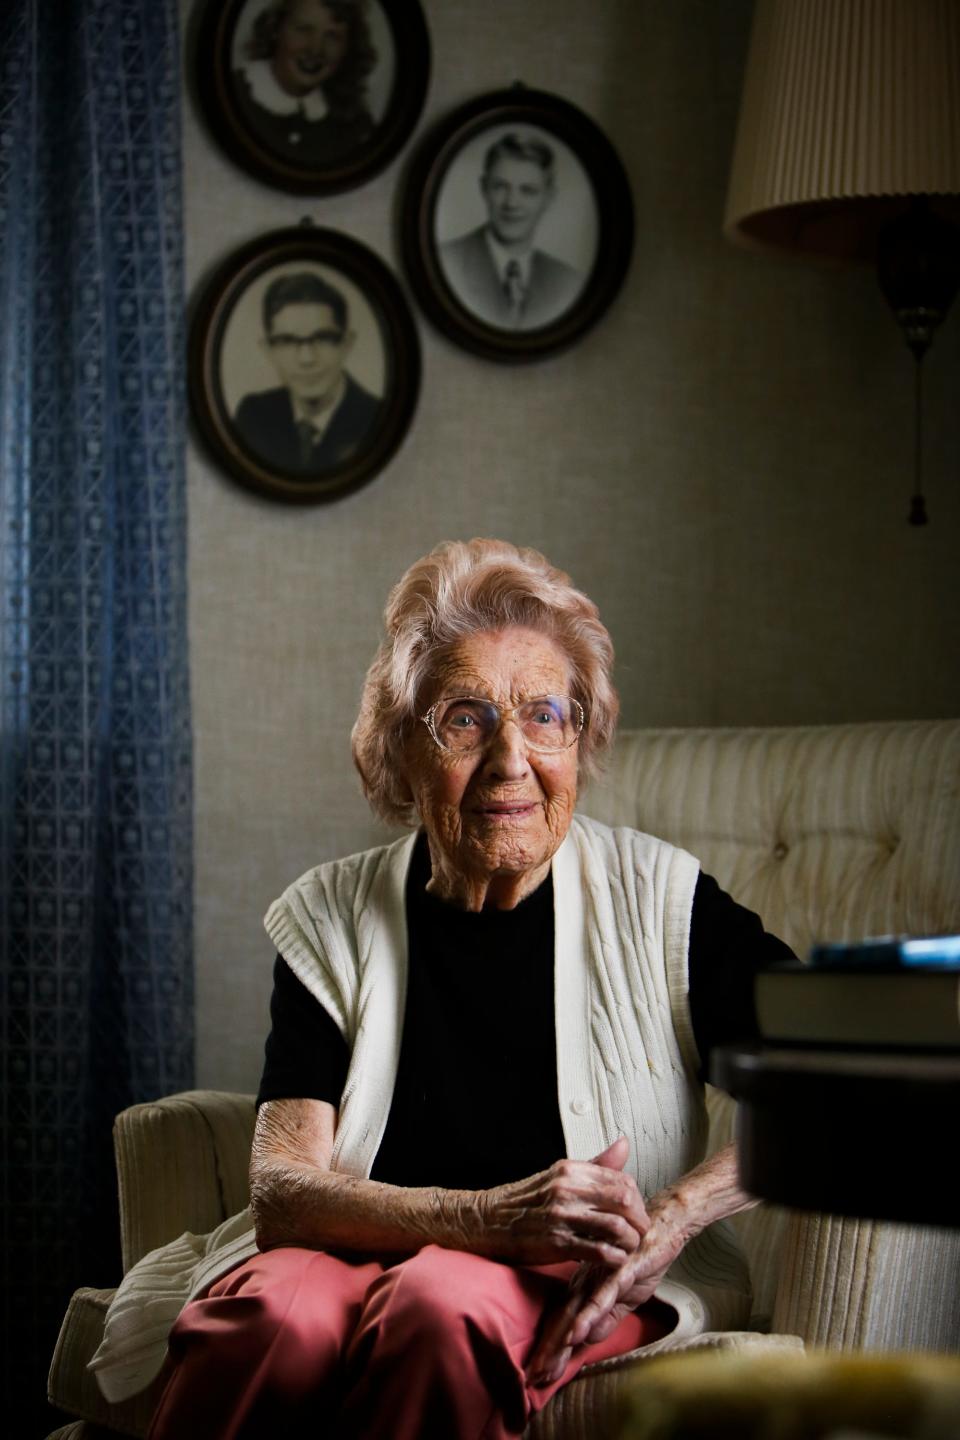 Irene Dunham, Michigan's oldest living resident and the oldest surviving student of the Bath Consolidated School before it was bombed in 1927 in the deadliest act of school violence in America, died Sunday, May 1.